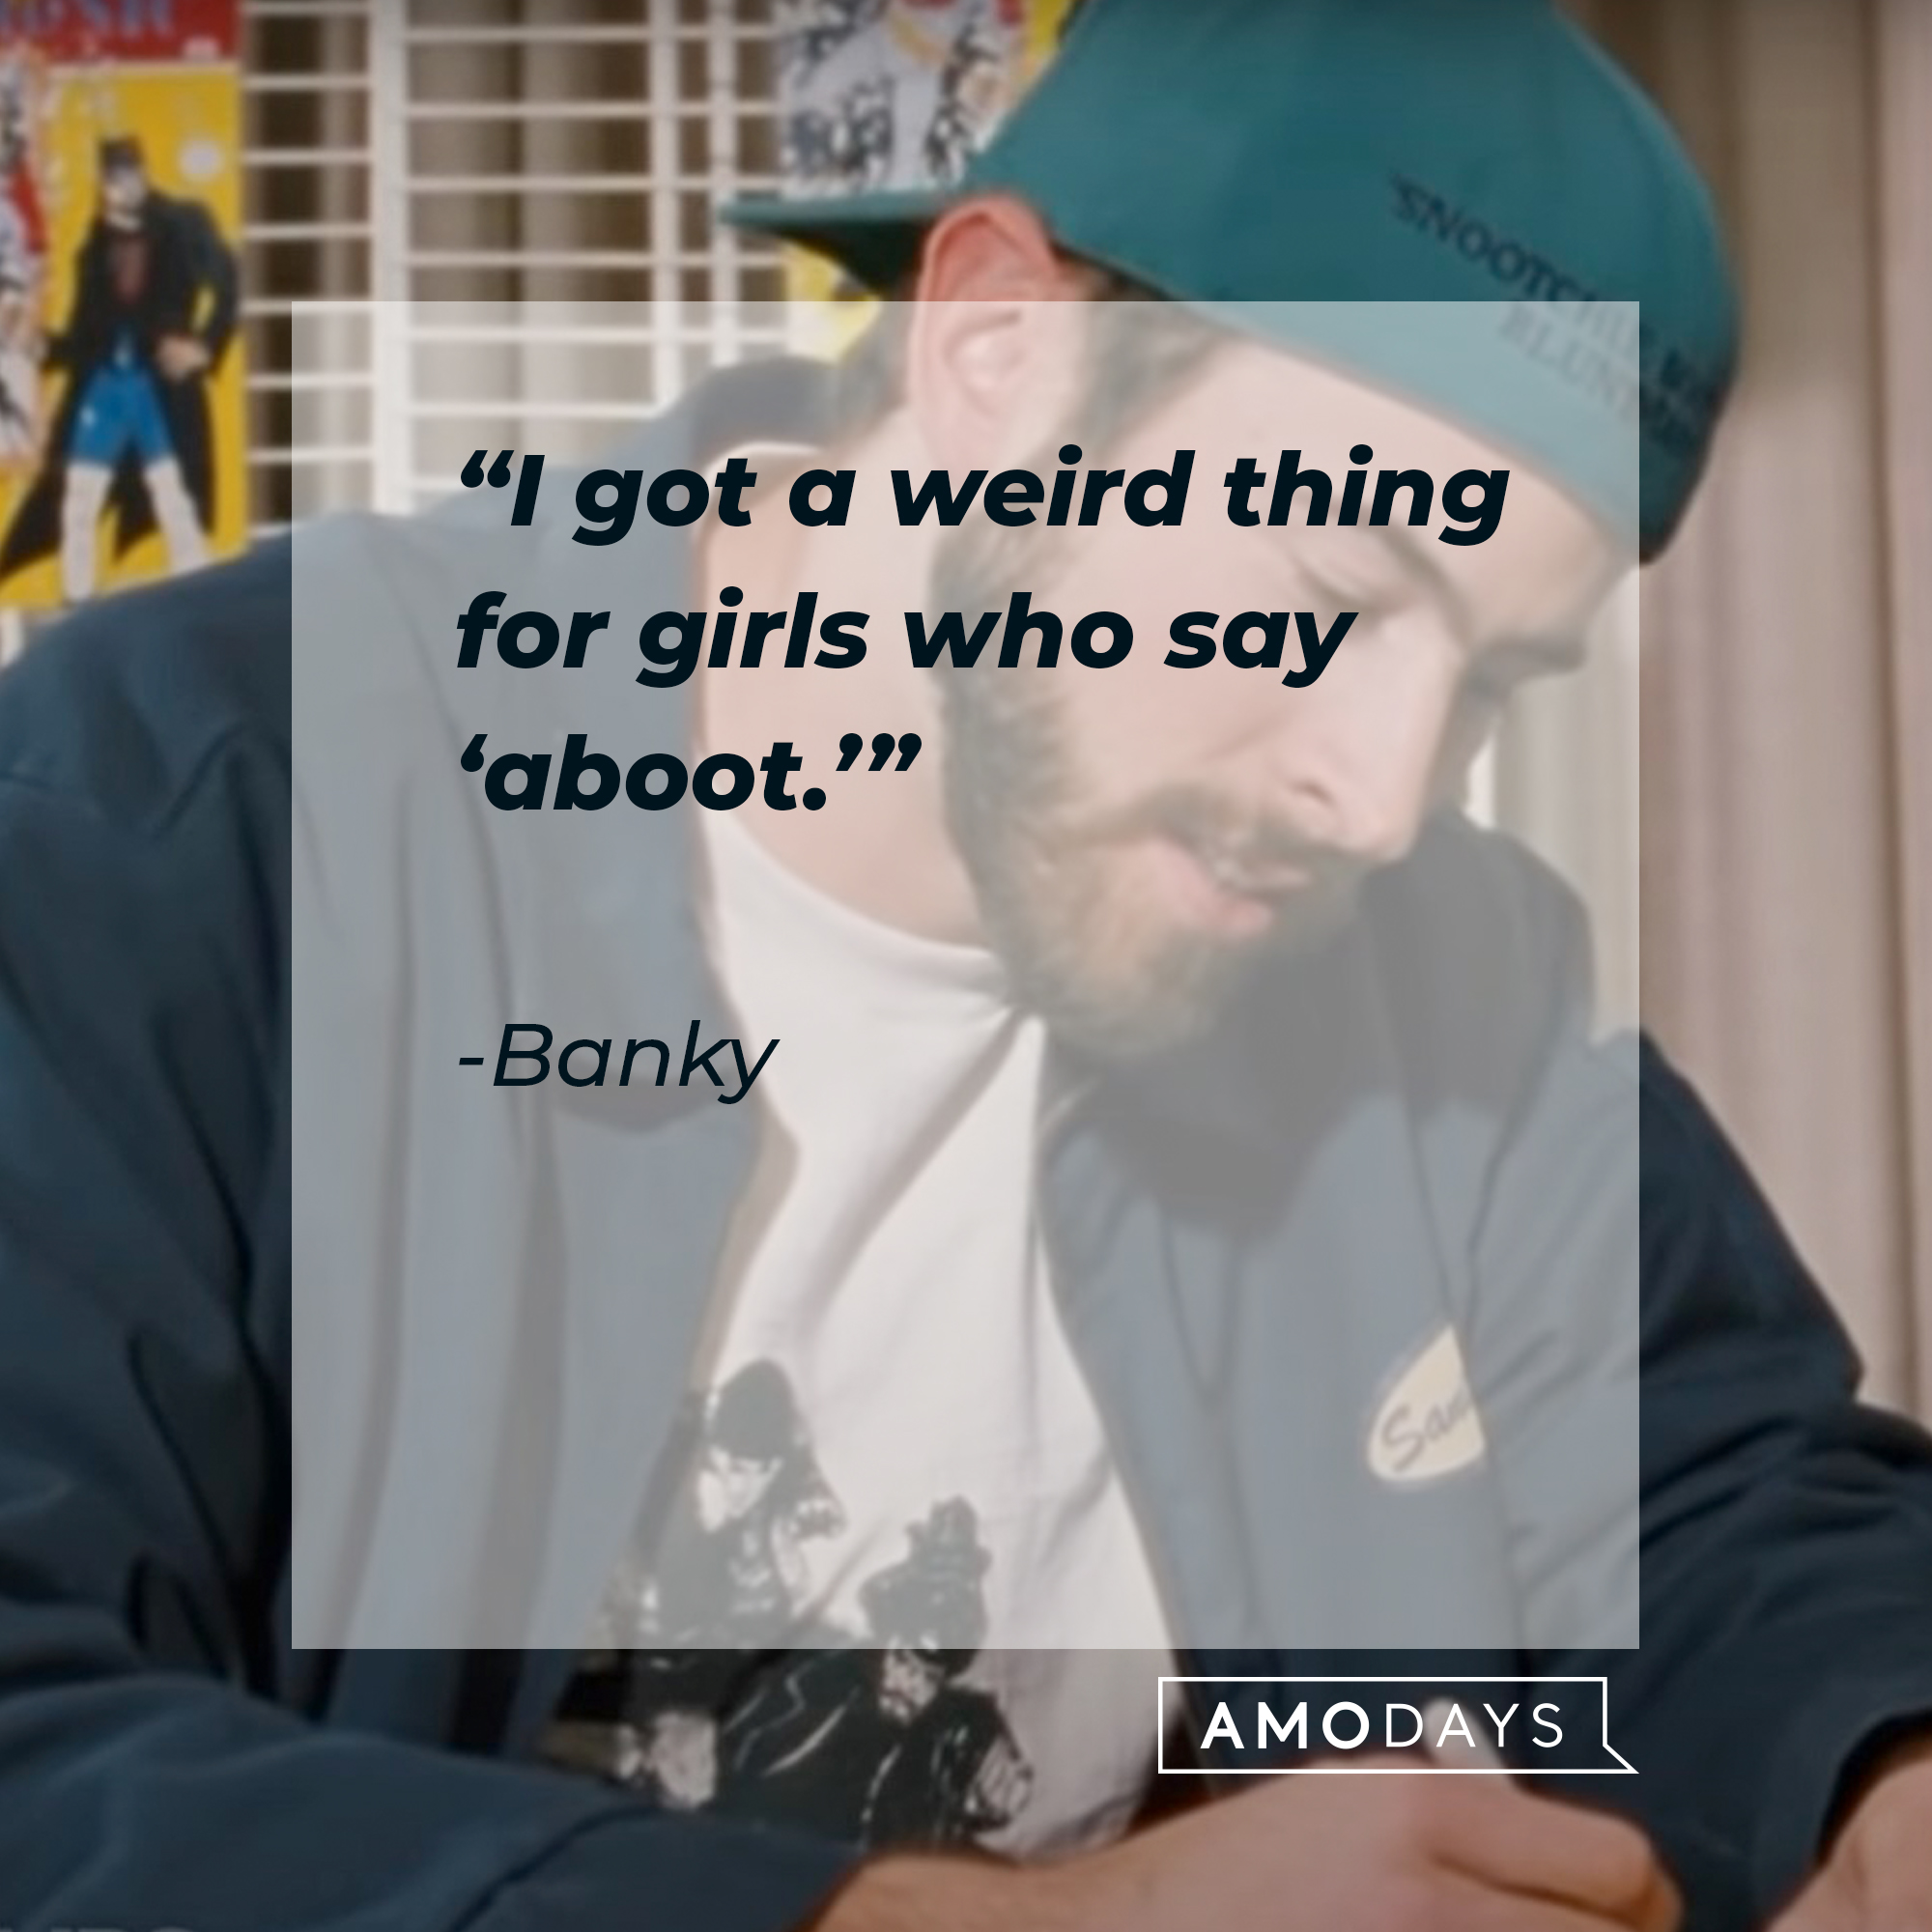 Banky, with his quote:“I got a weird thing for girls who say ‘aboot.’” | Source: facebook.com/ChasingAmyMovie